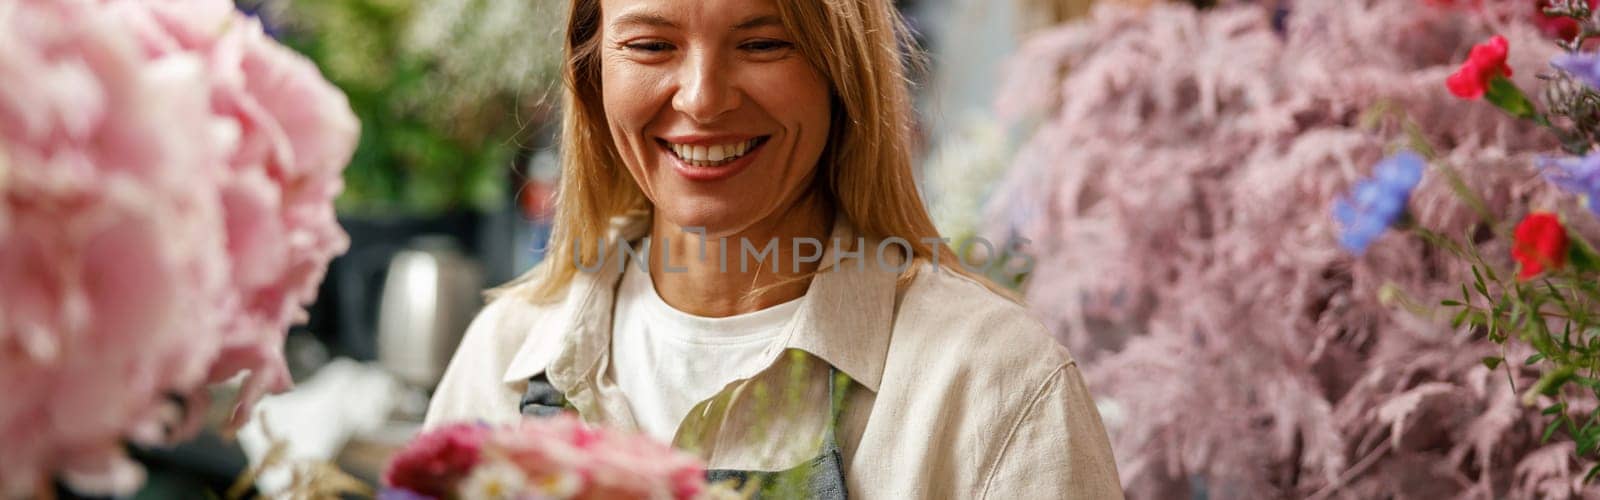 Smiling woman flower shop owner in apron looking on bouquet of flowers at florist store by Yaroslav_astakhov